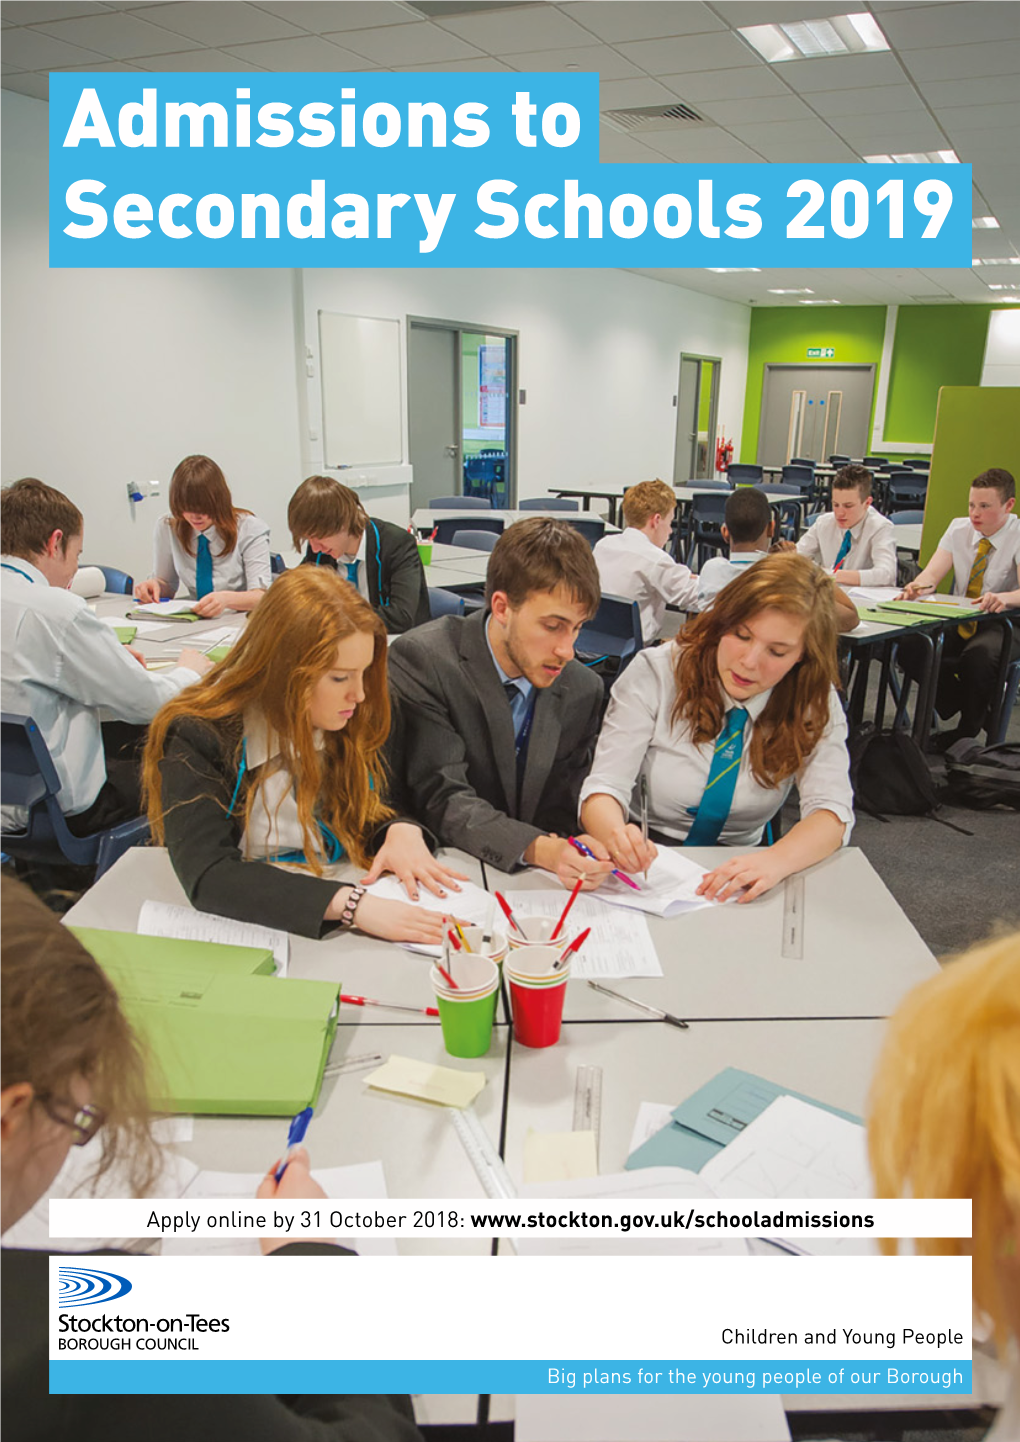 Admissions to Secondary Schools 2019